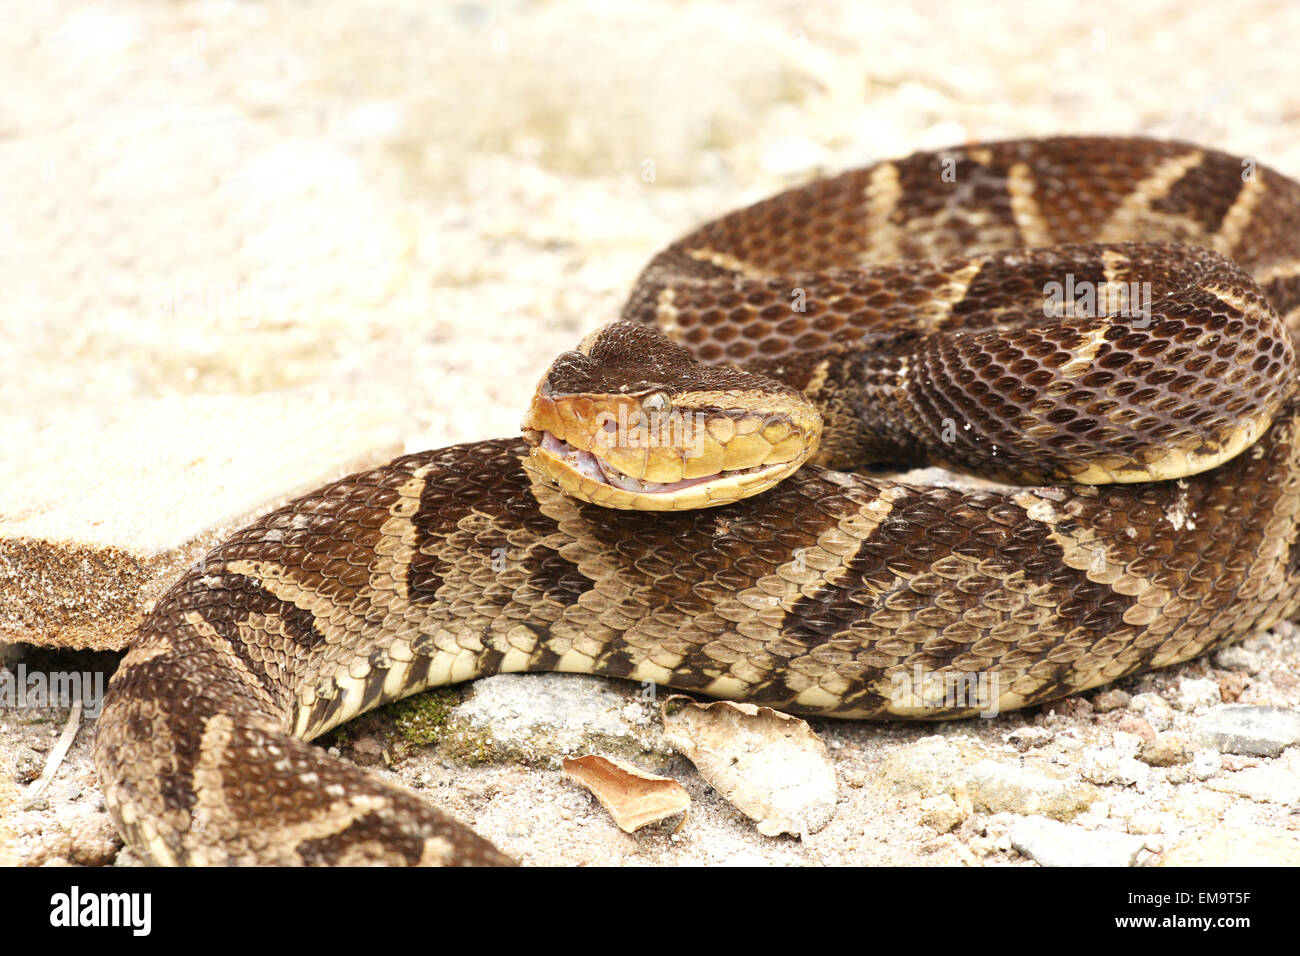 Bothrops asper a venomous pit viper  also called Ferdelance laying on sandy ground ready to strike Stock Photo